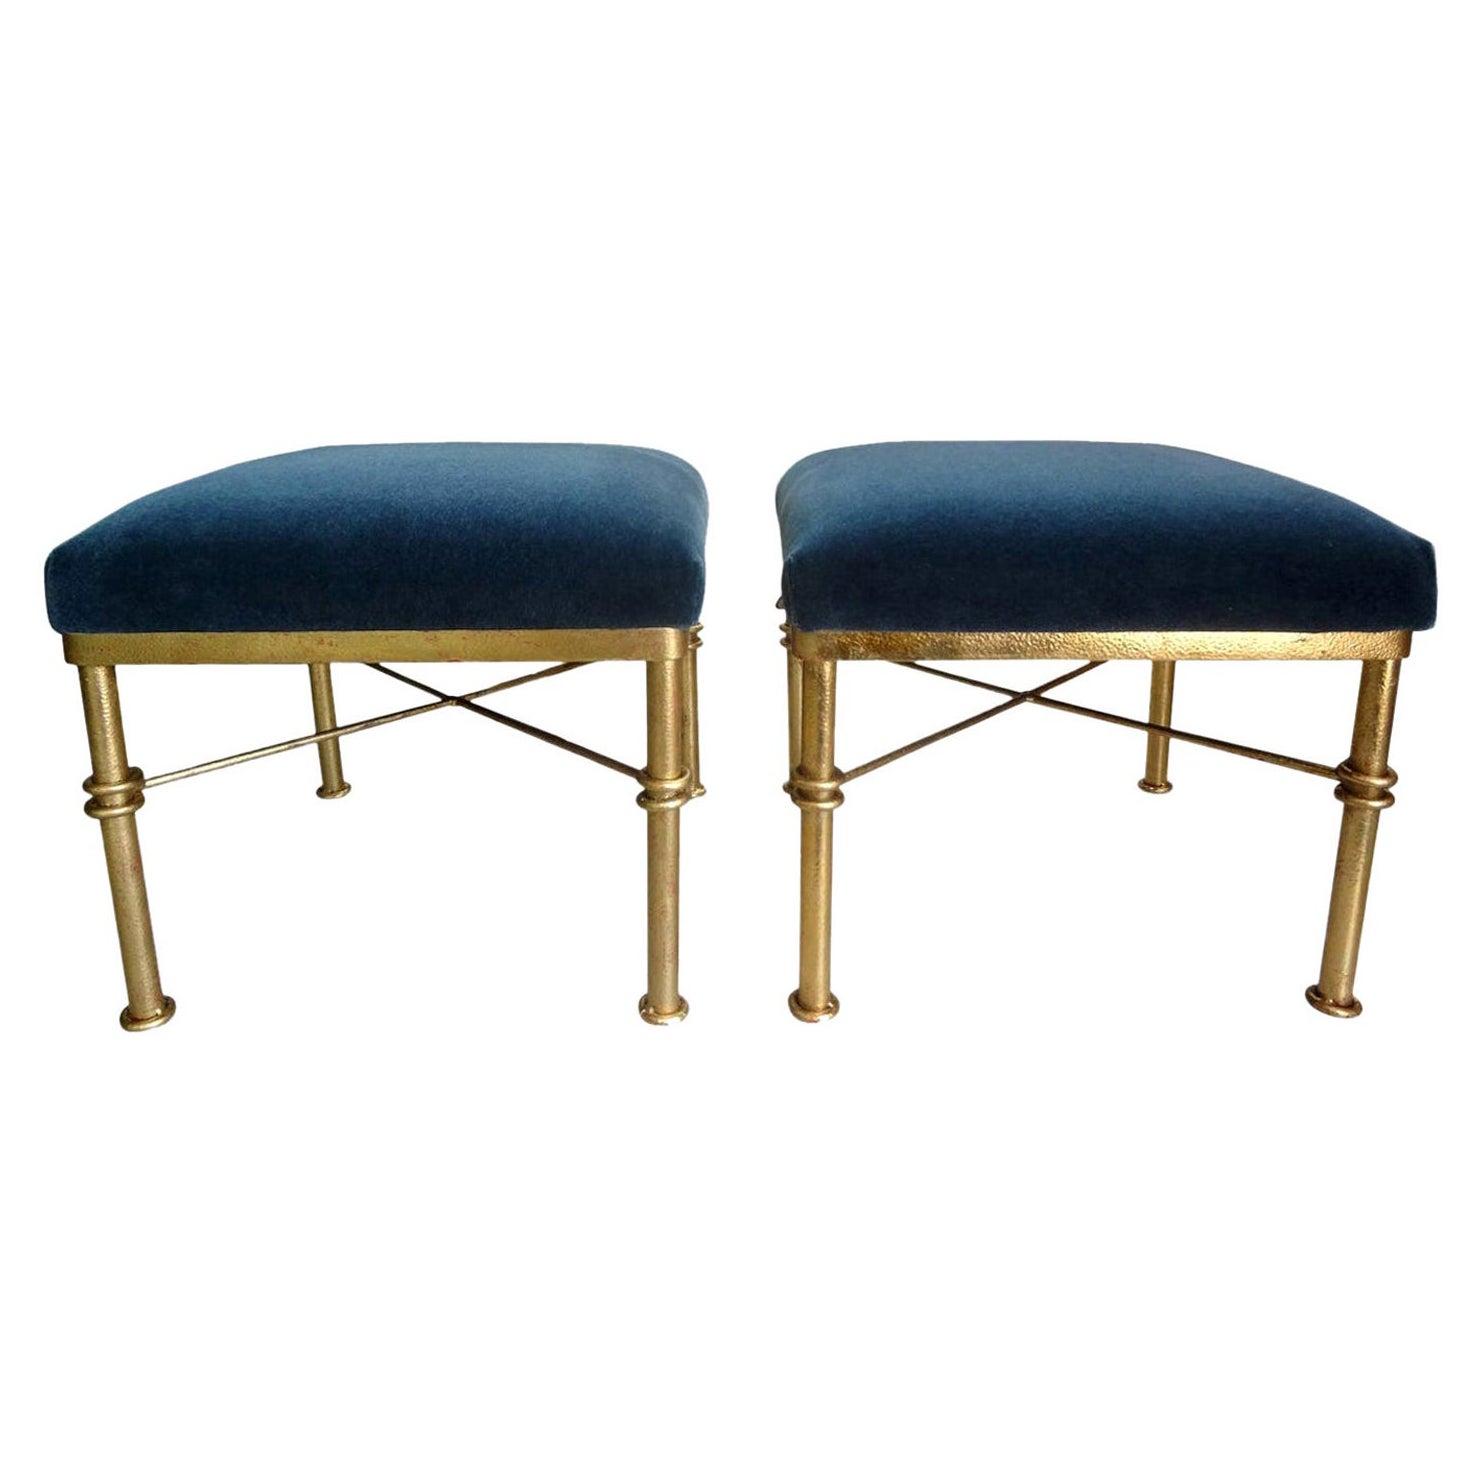 Pair of Midcentury Gilt Iron Ottomans For Sale